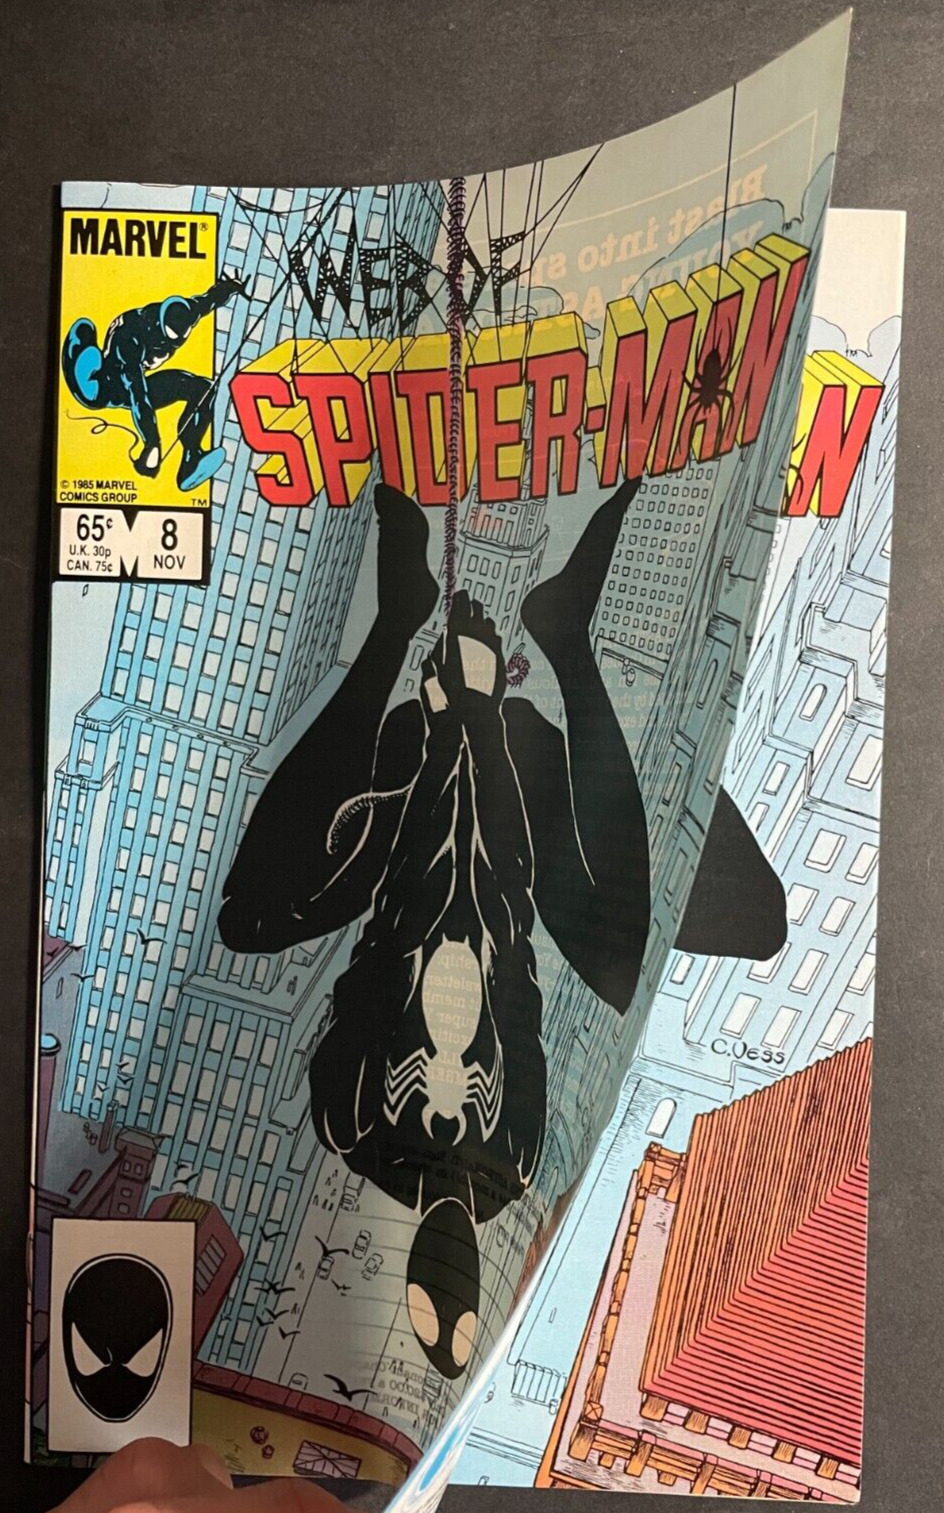 Web of Spider-Man #8 - Marvel 1985 Comics DOUBLE COVER